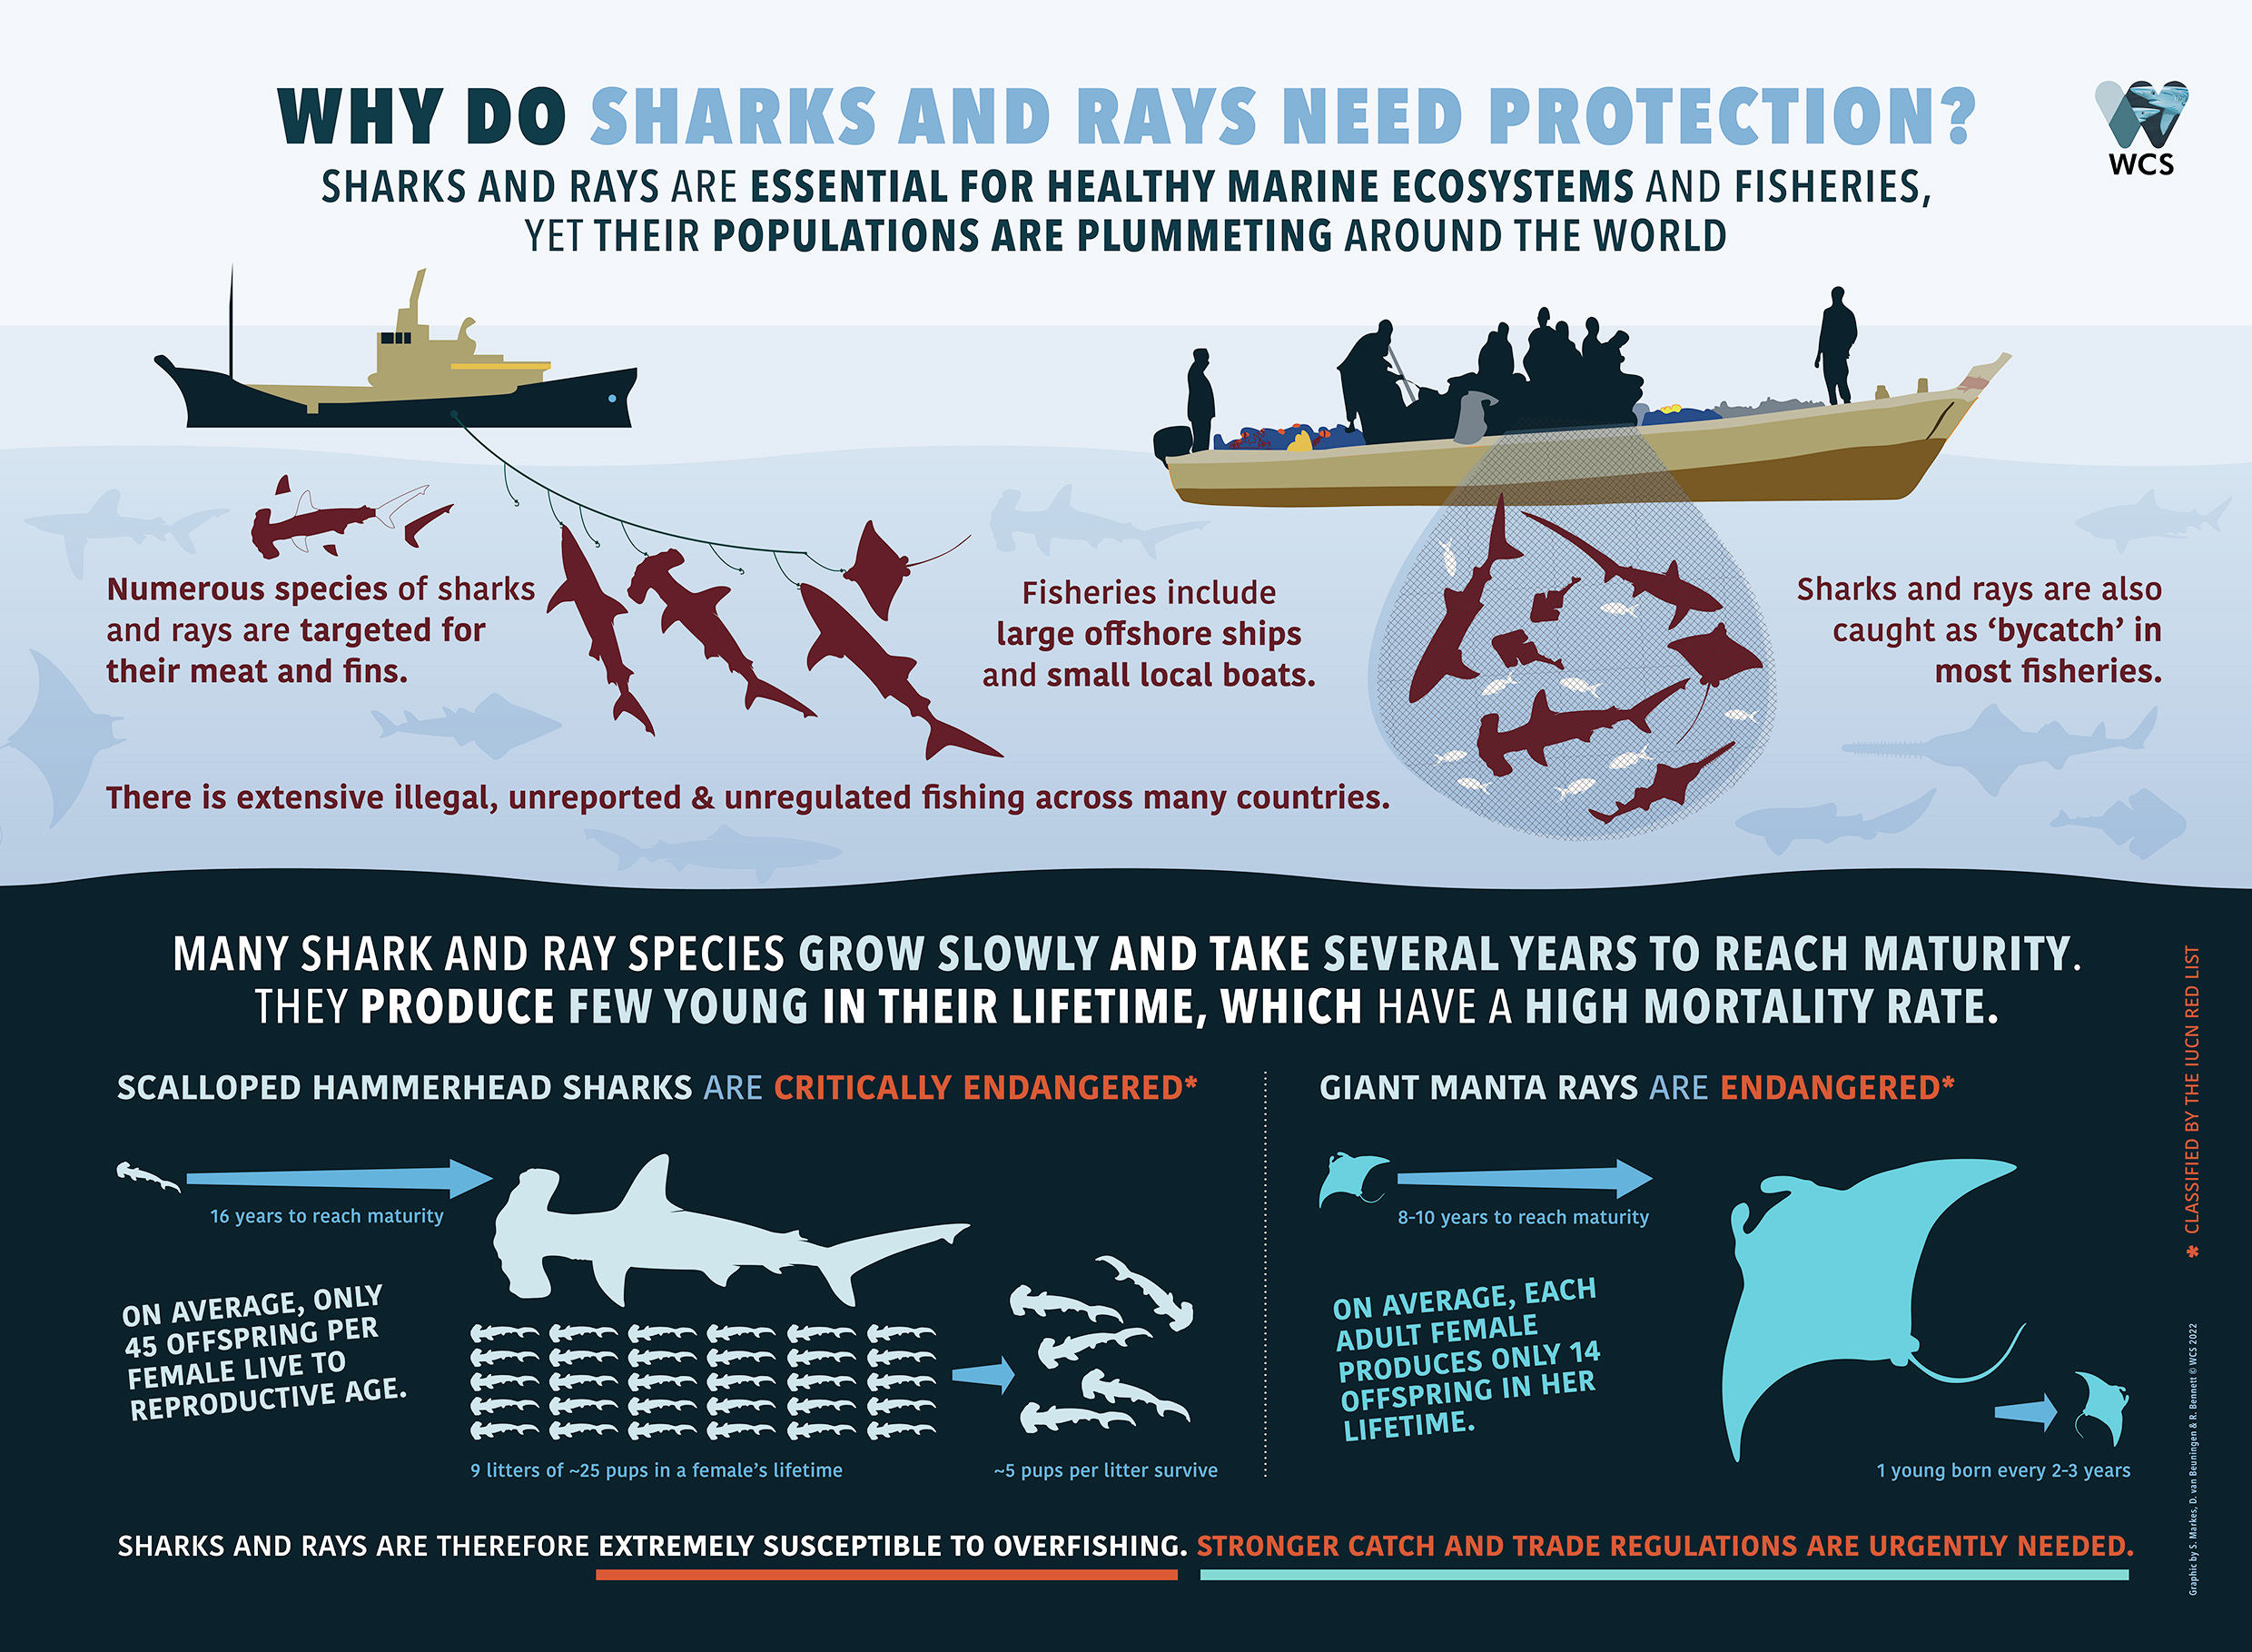 Why Do Sharks and Rays Need Protection?